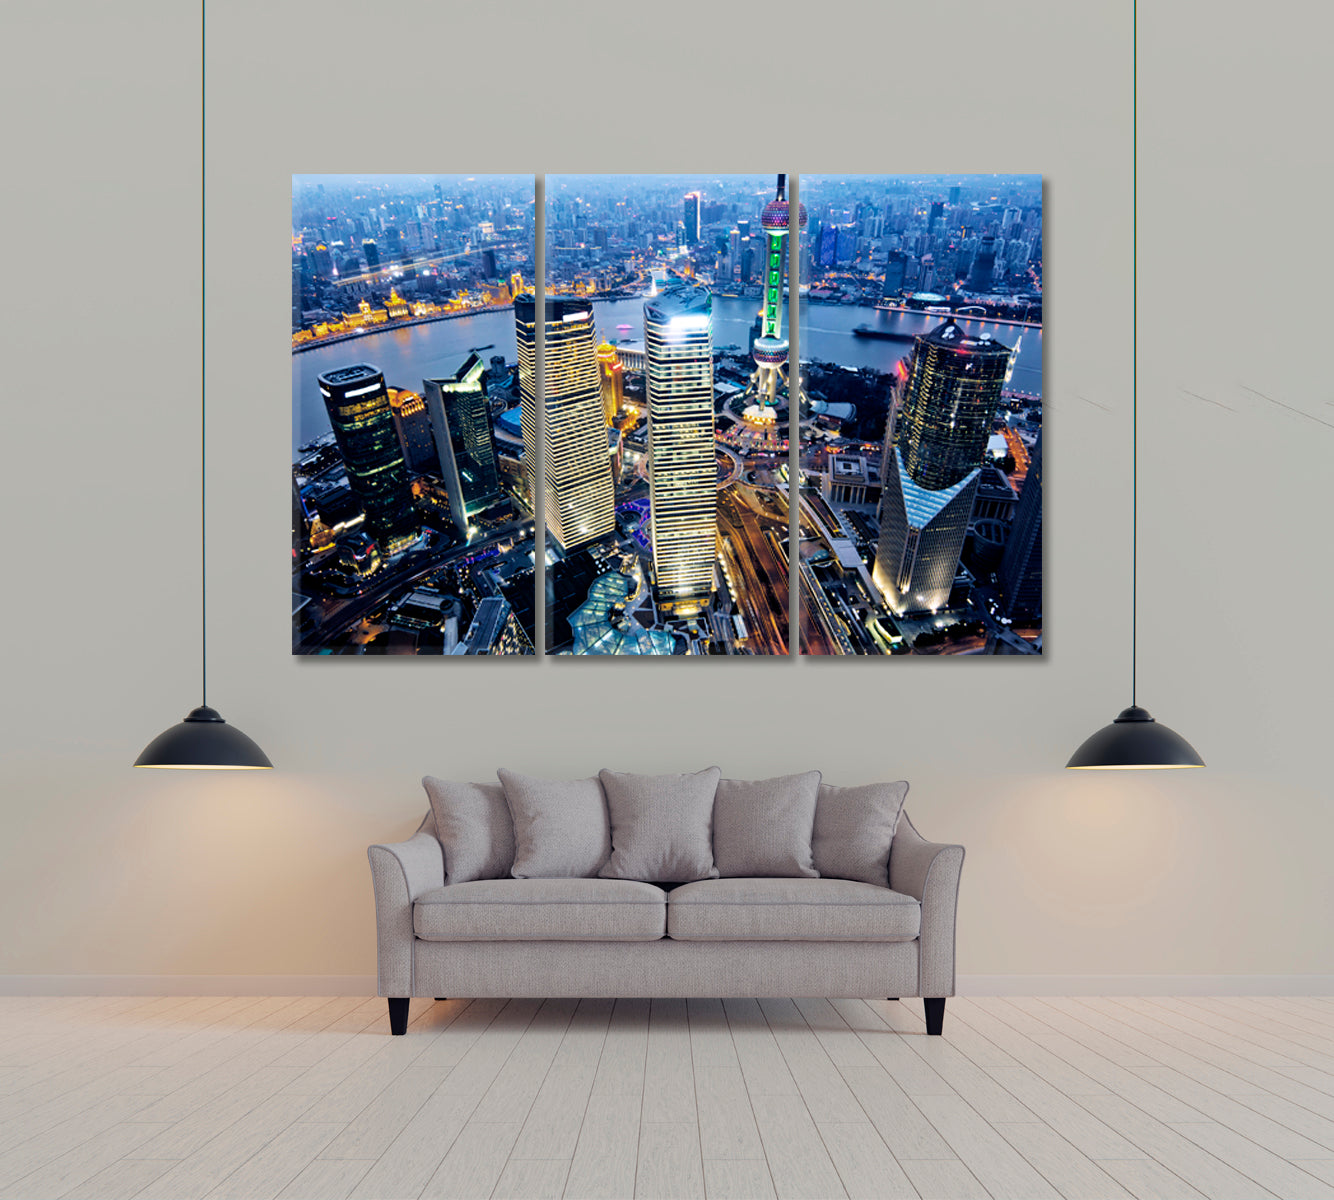 Shanghai Downtown at Night Canvas Print ArtLexy 3 Panels 36"x24" inches 